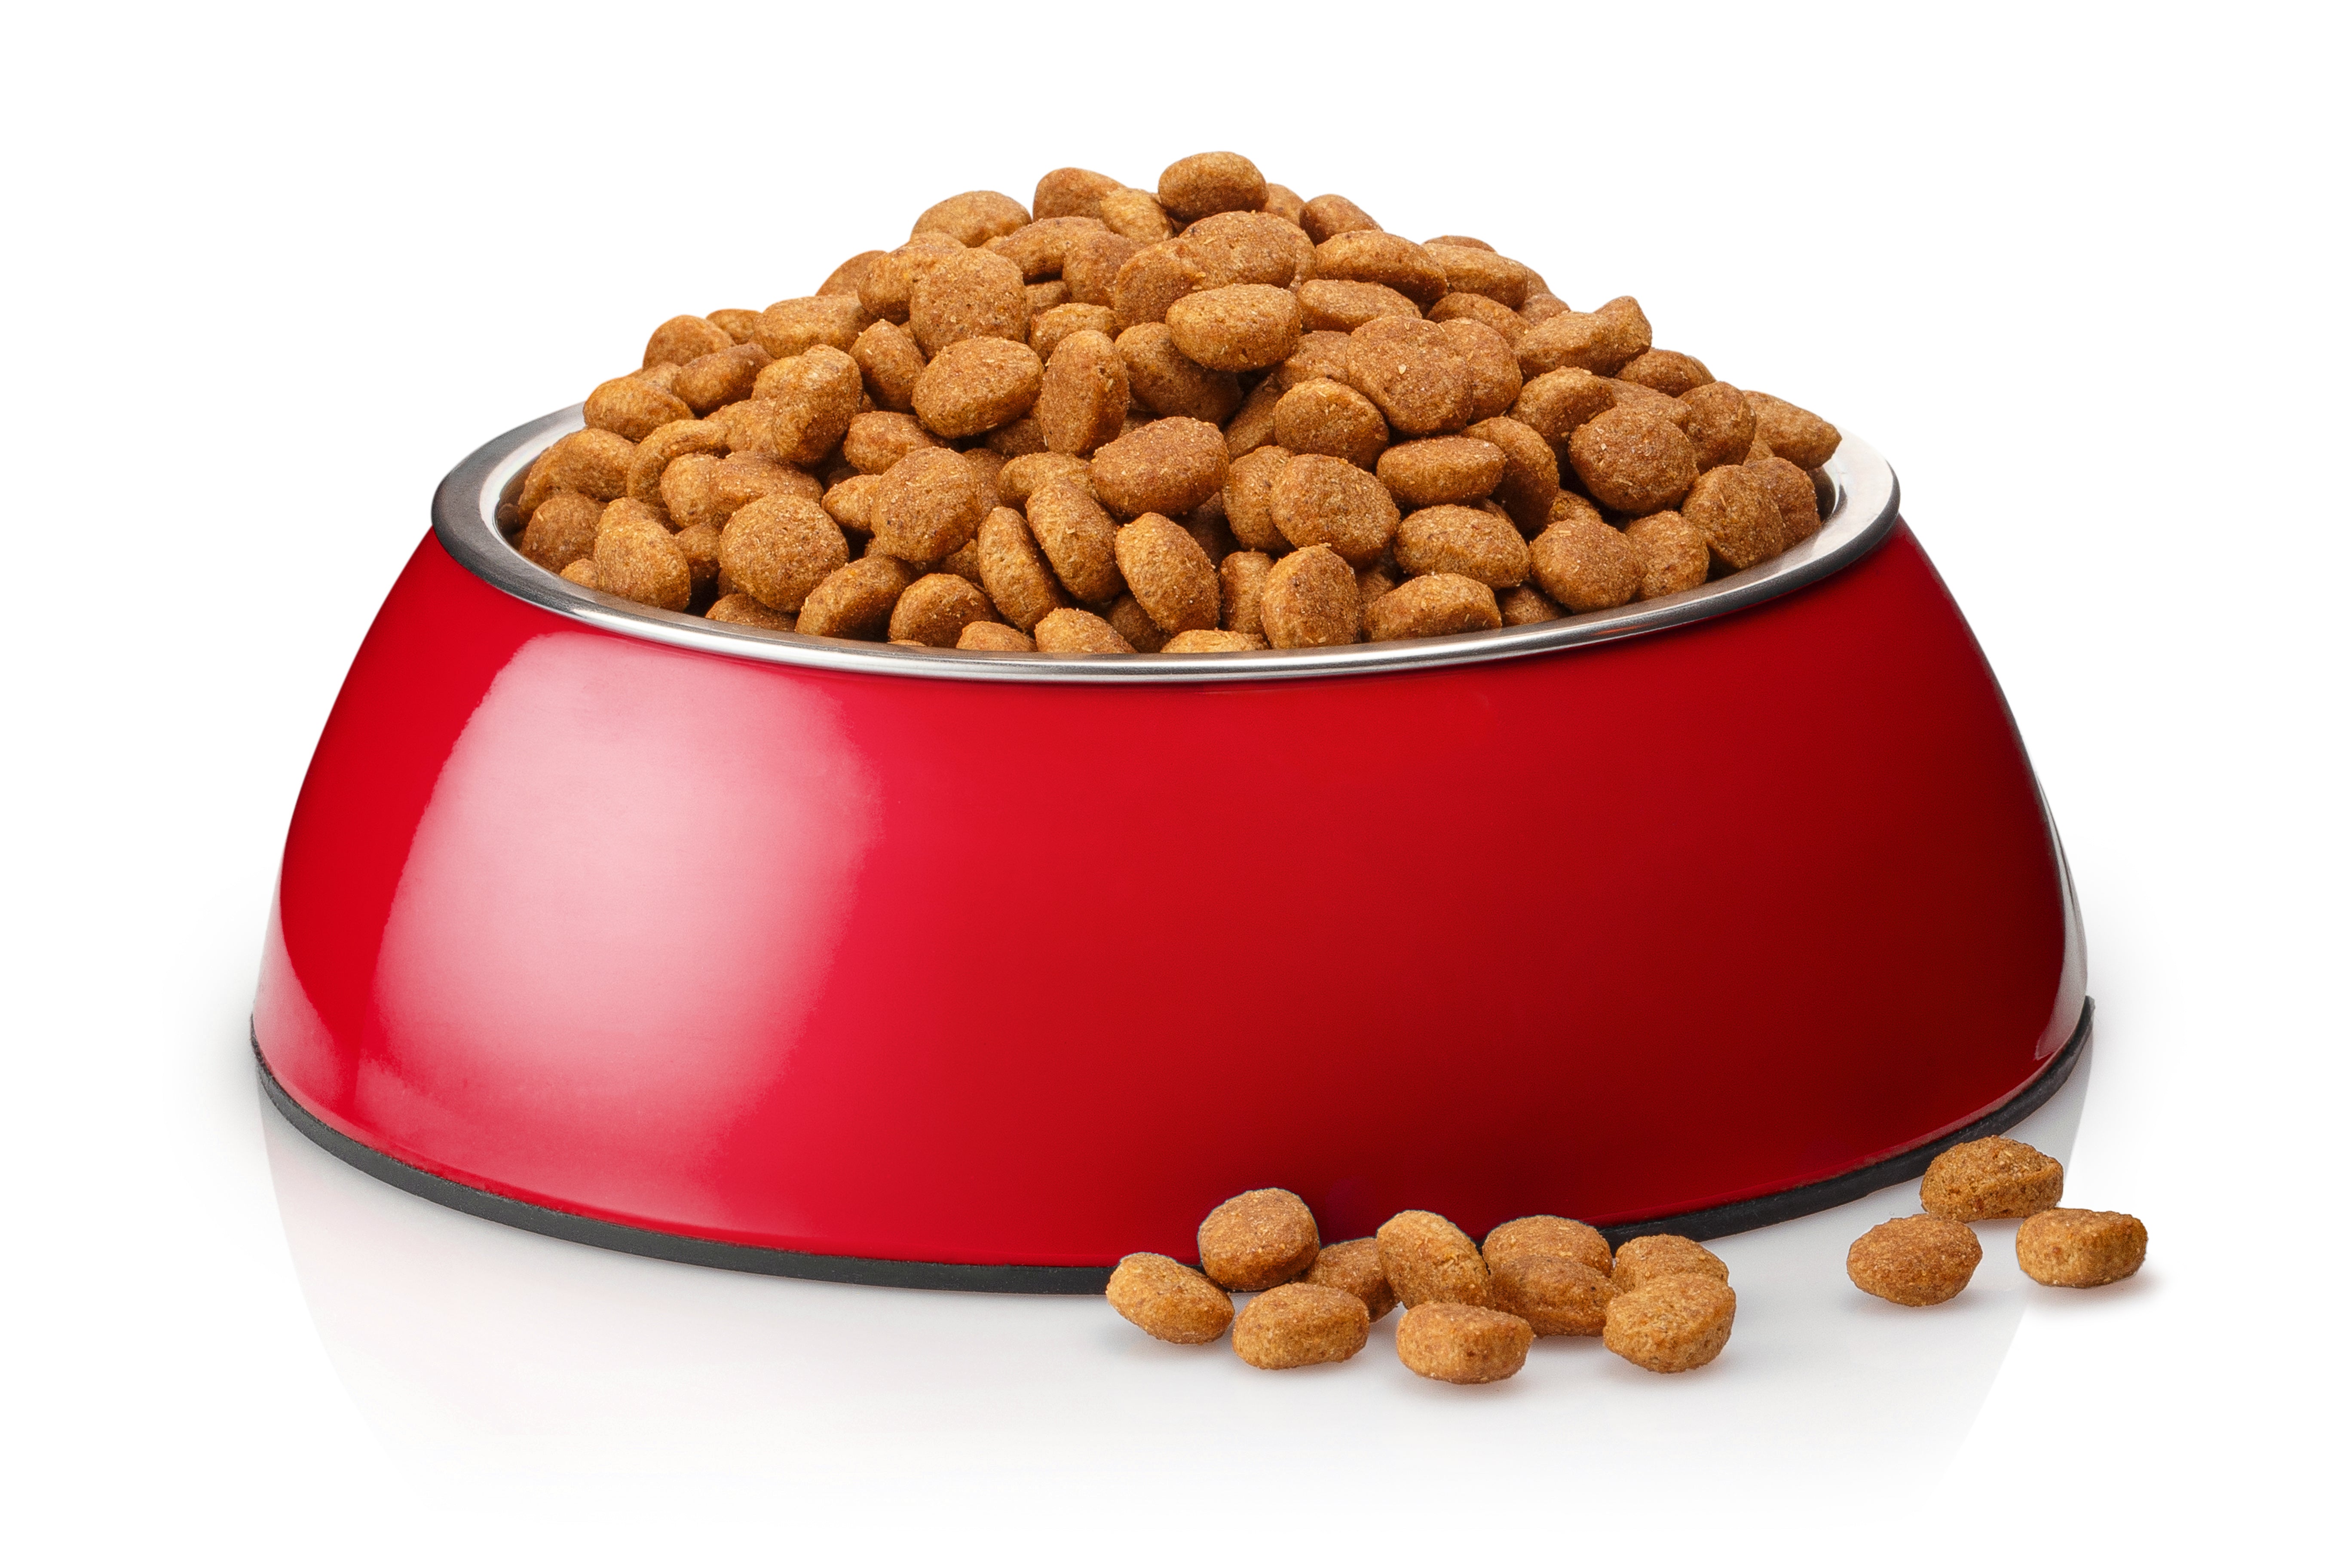 When to Change Your Cat’s Food: 4 Easy Tips for Switching Cat Food